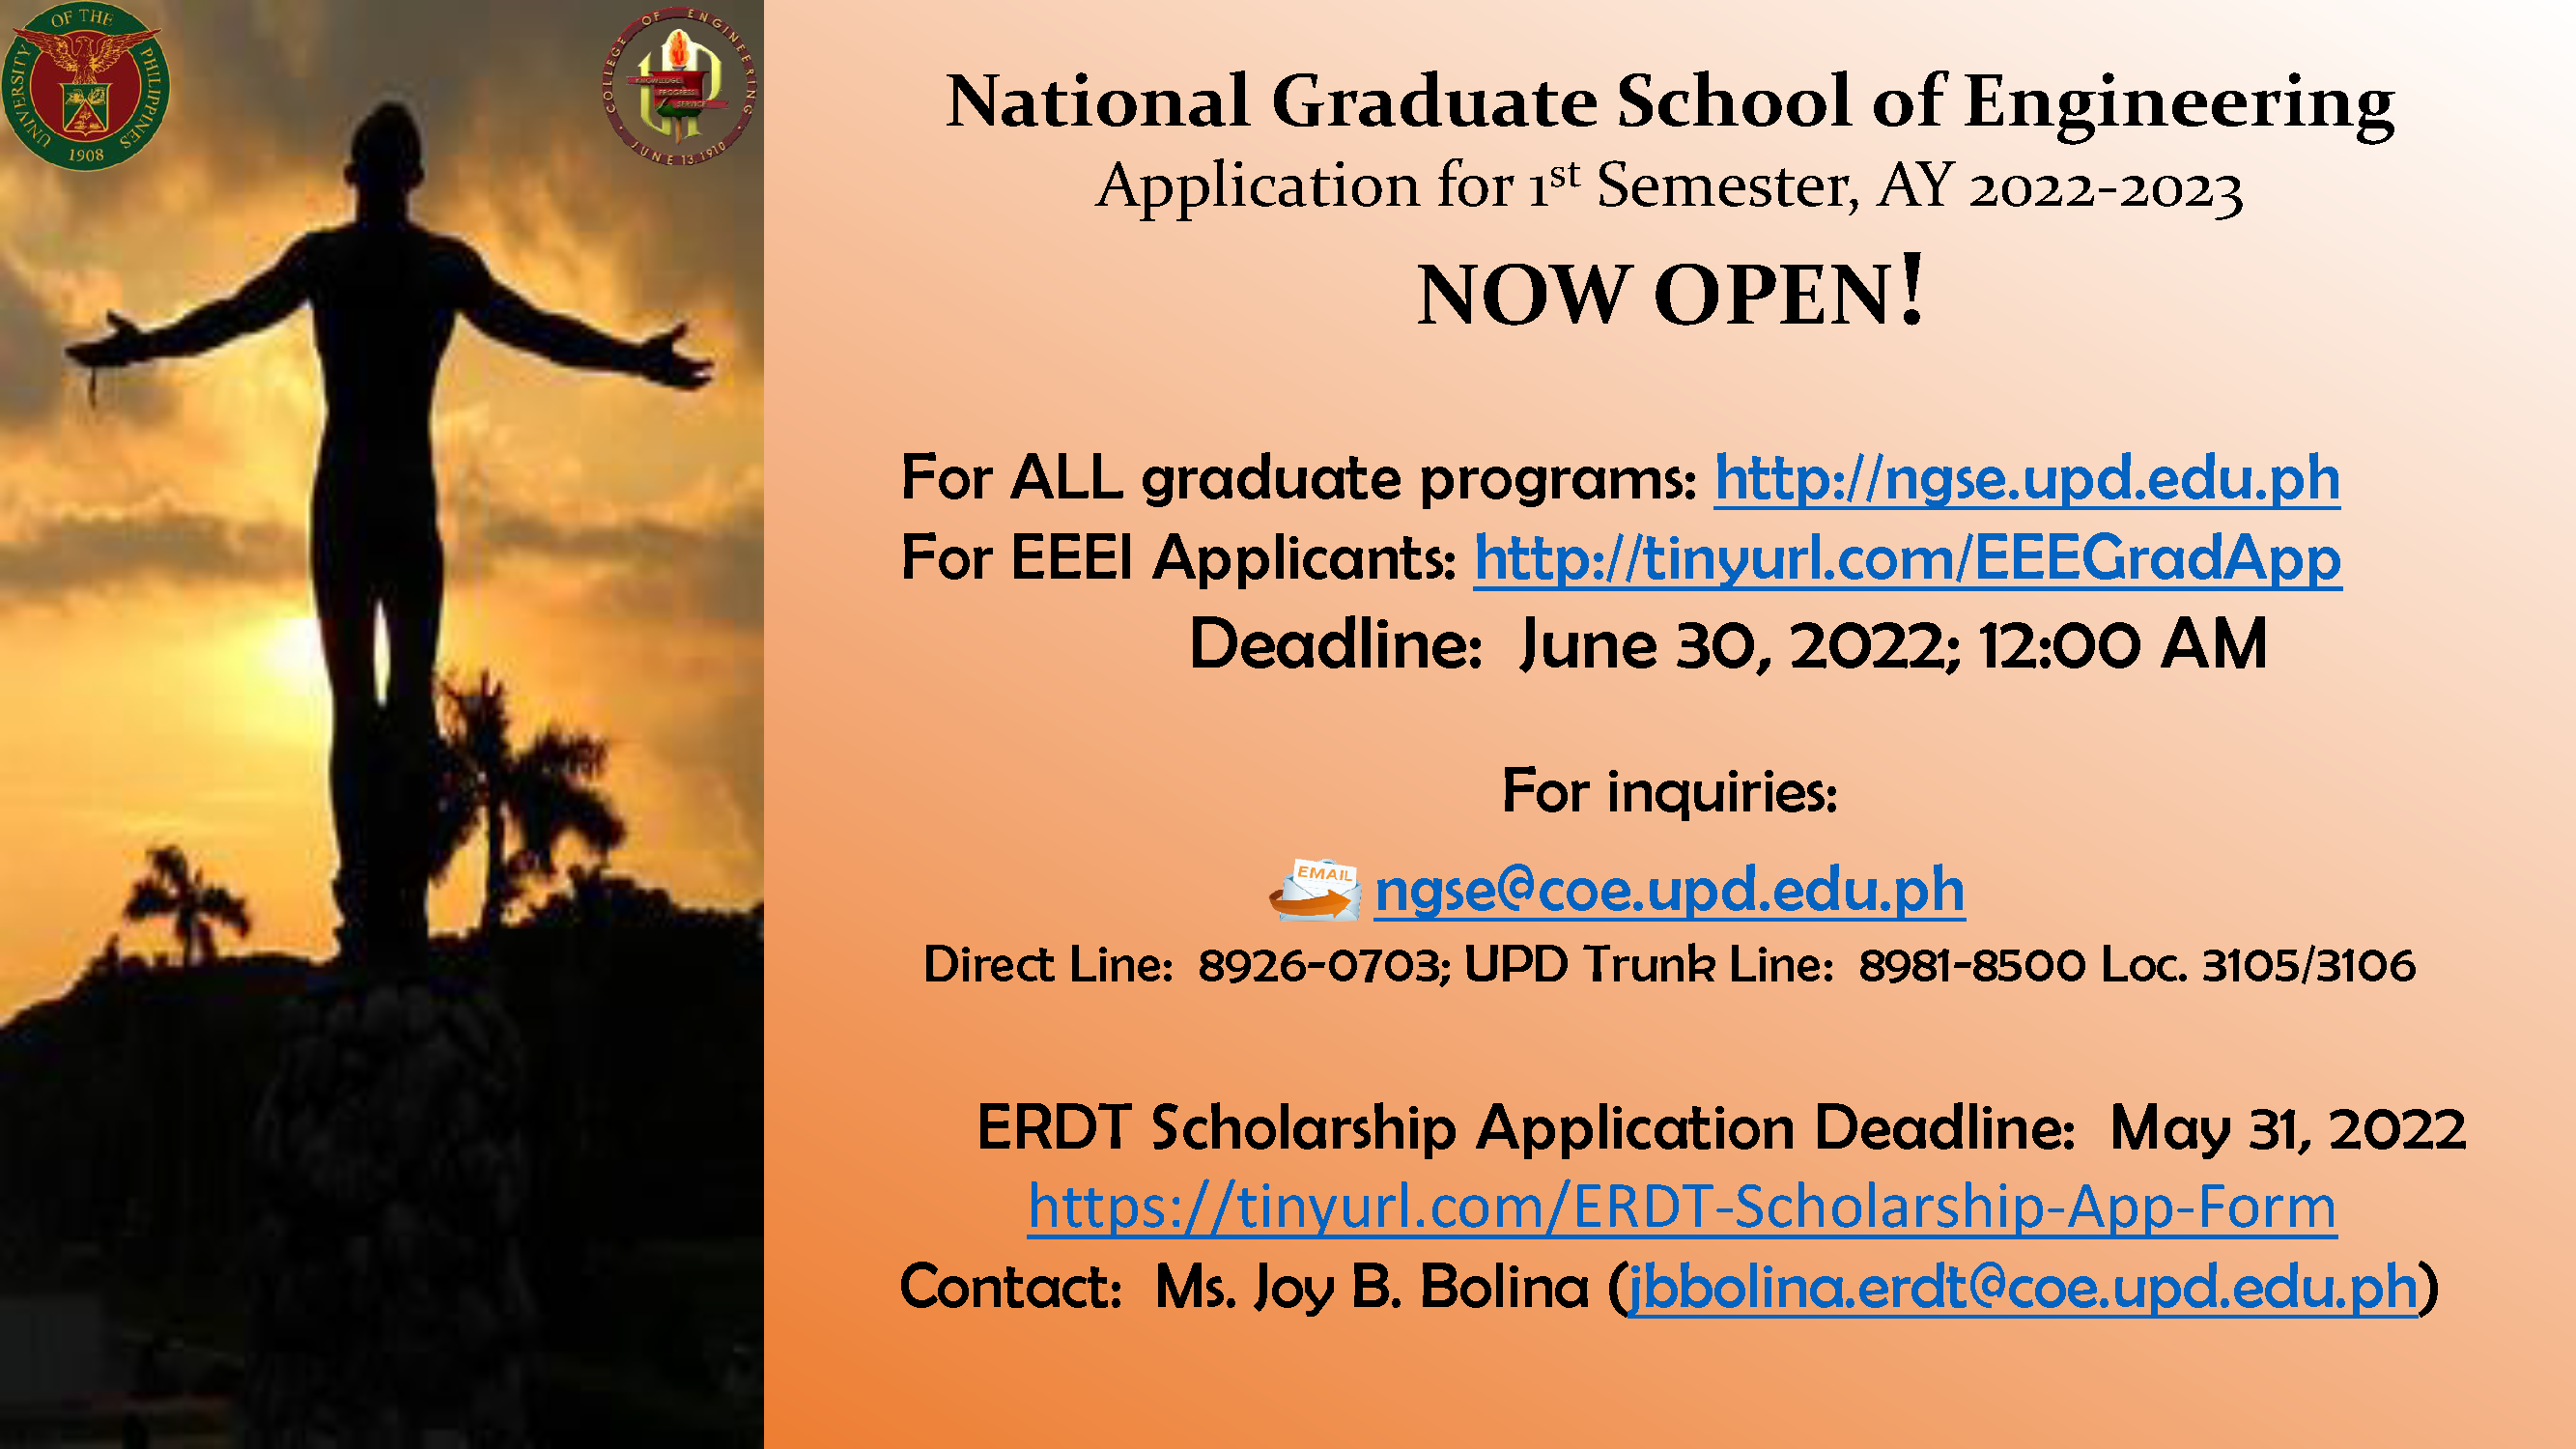 NGSE & ERDT Applications Now Open for the 1st Semester AY 2022-2023